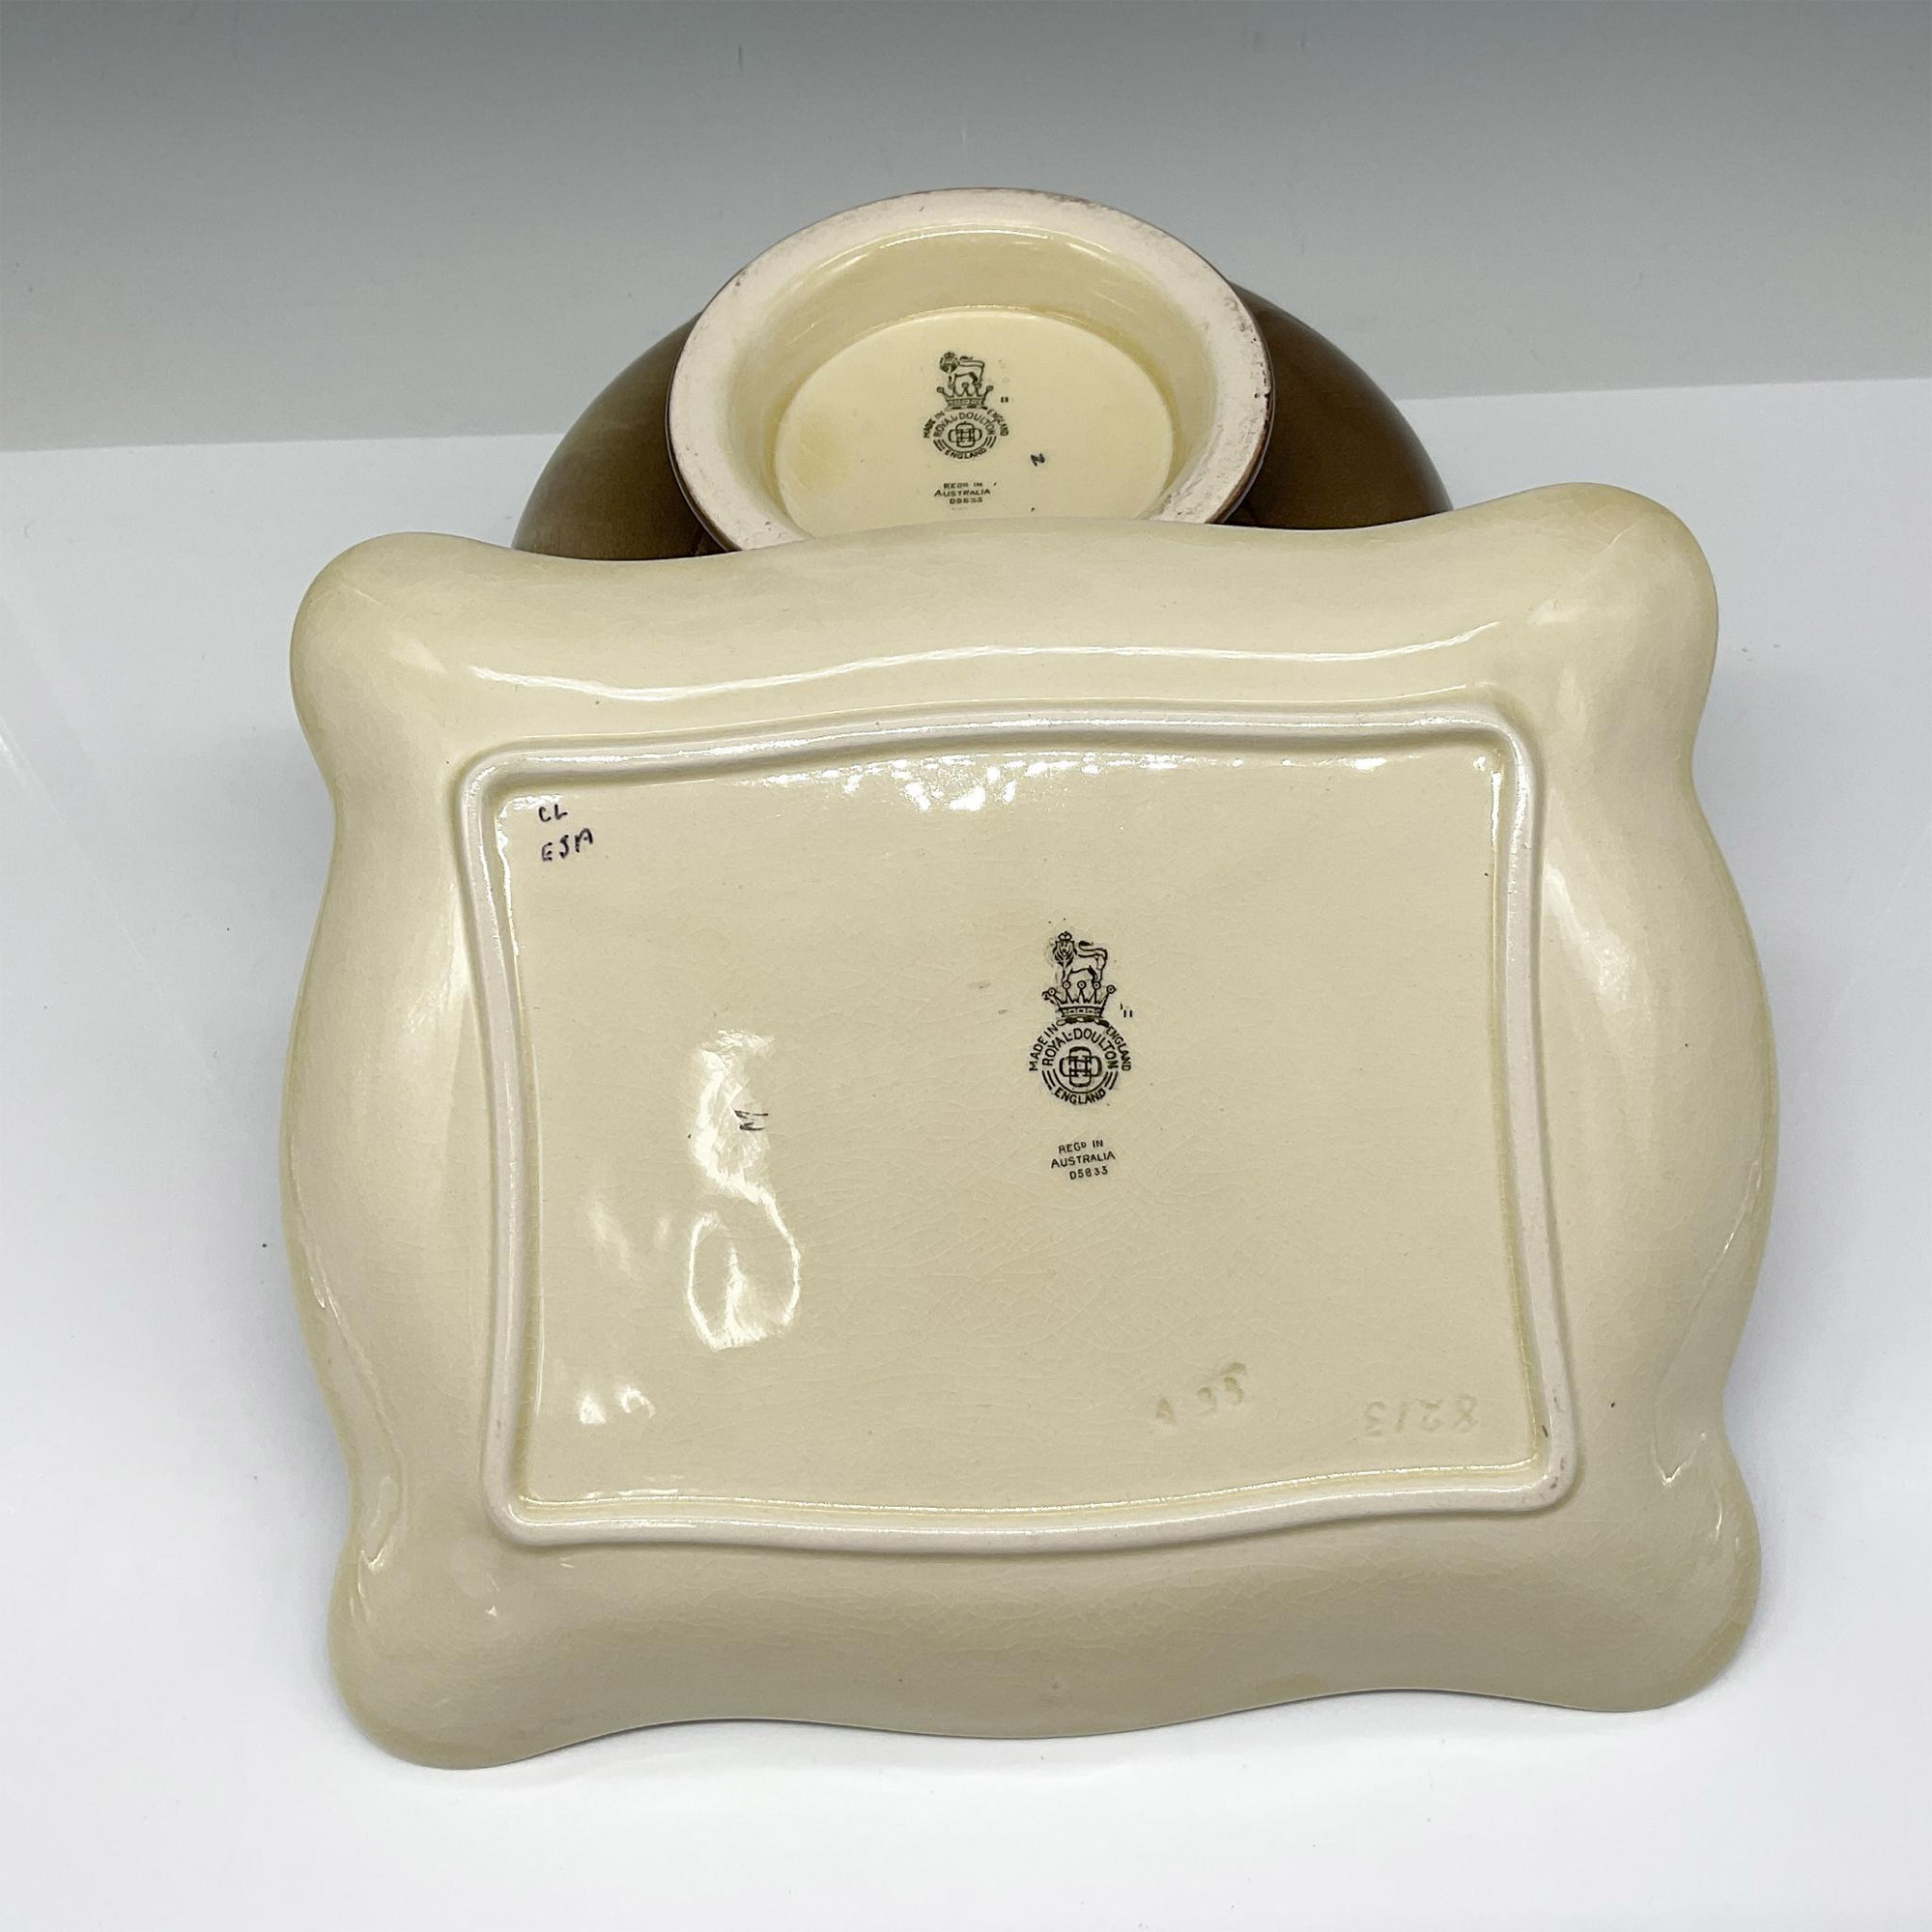 2pc Royal Doulton Series Ware, David Copperfield - Image 3 of 3